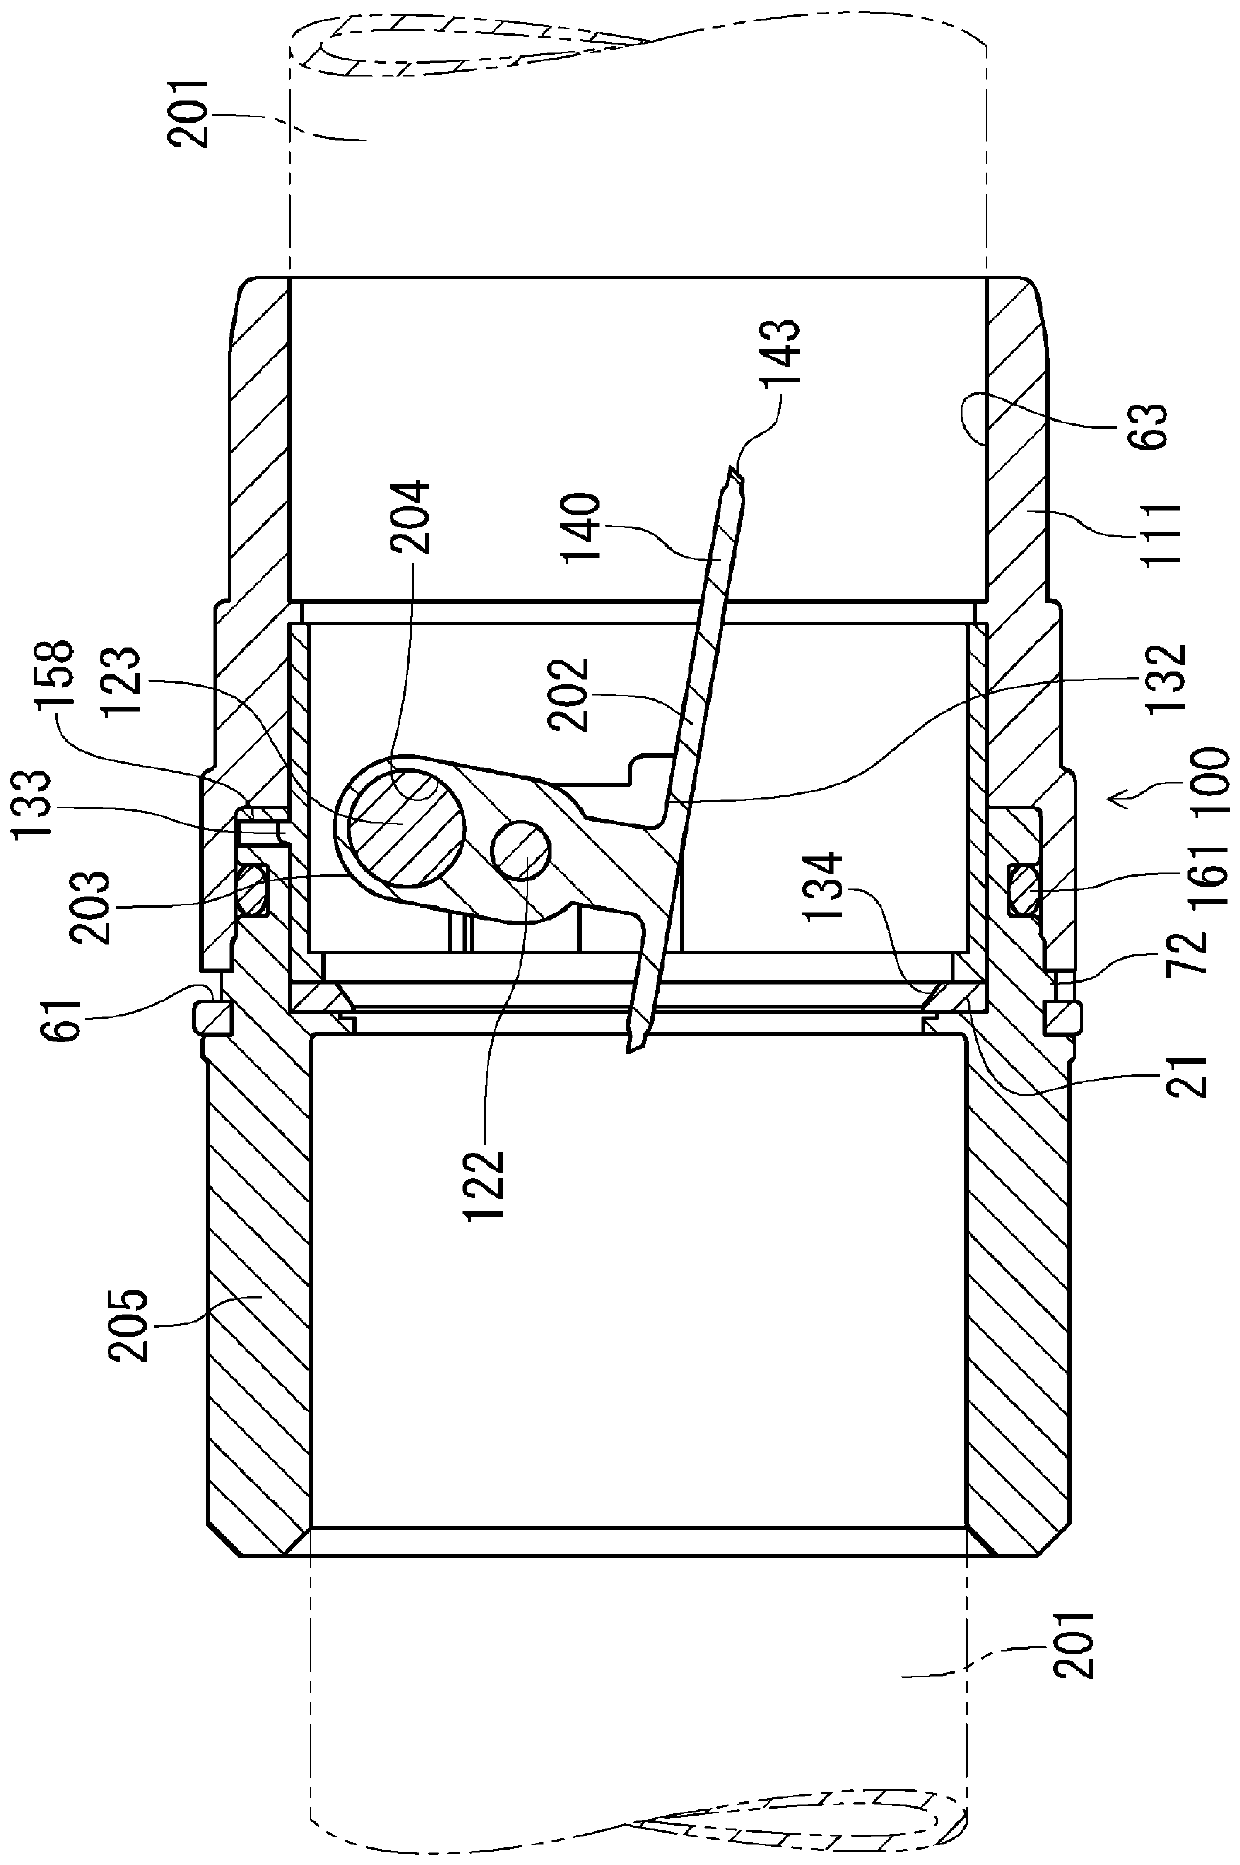 Aeration valve and drain pipe system